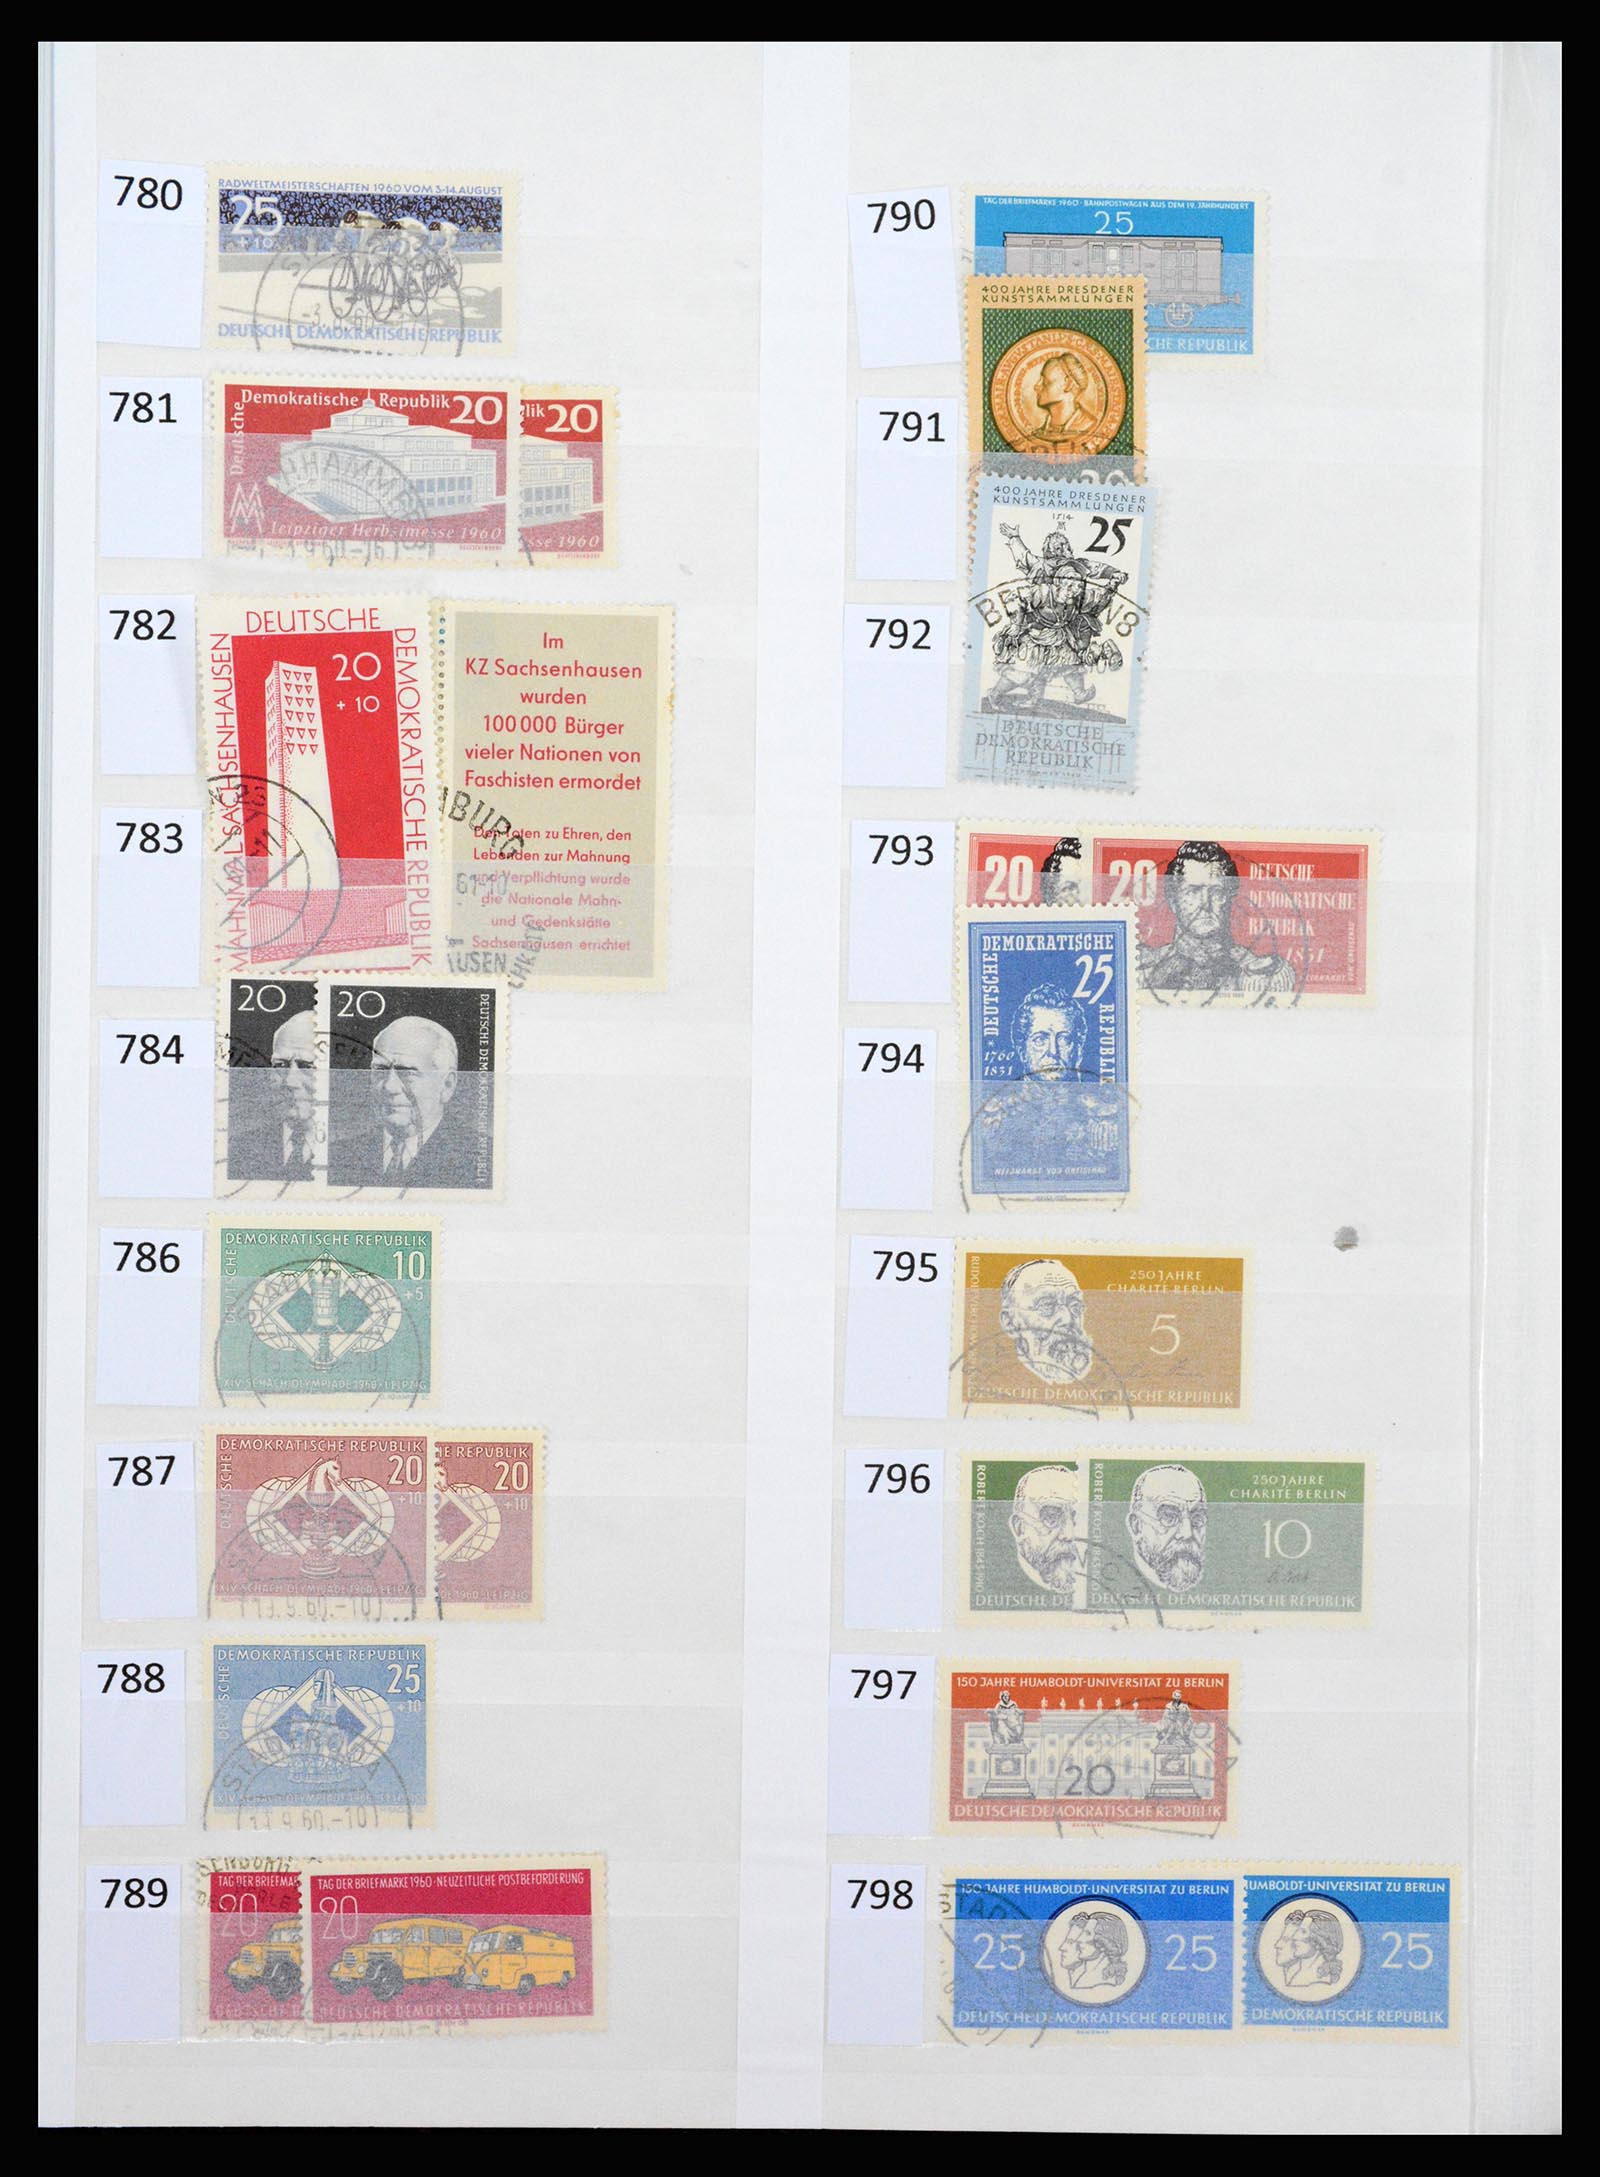 37253 031 - Stamp collection 37253 GDR 1949-1990.